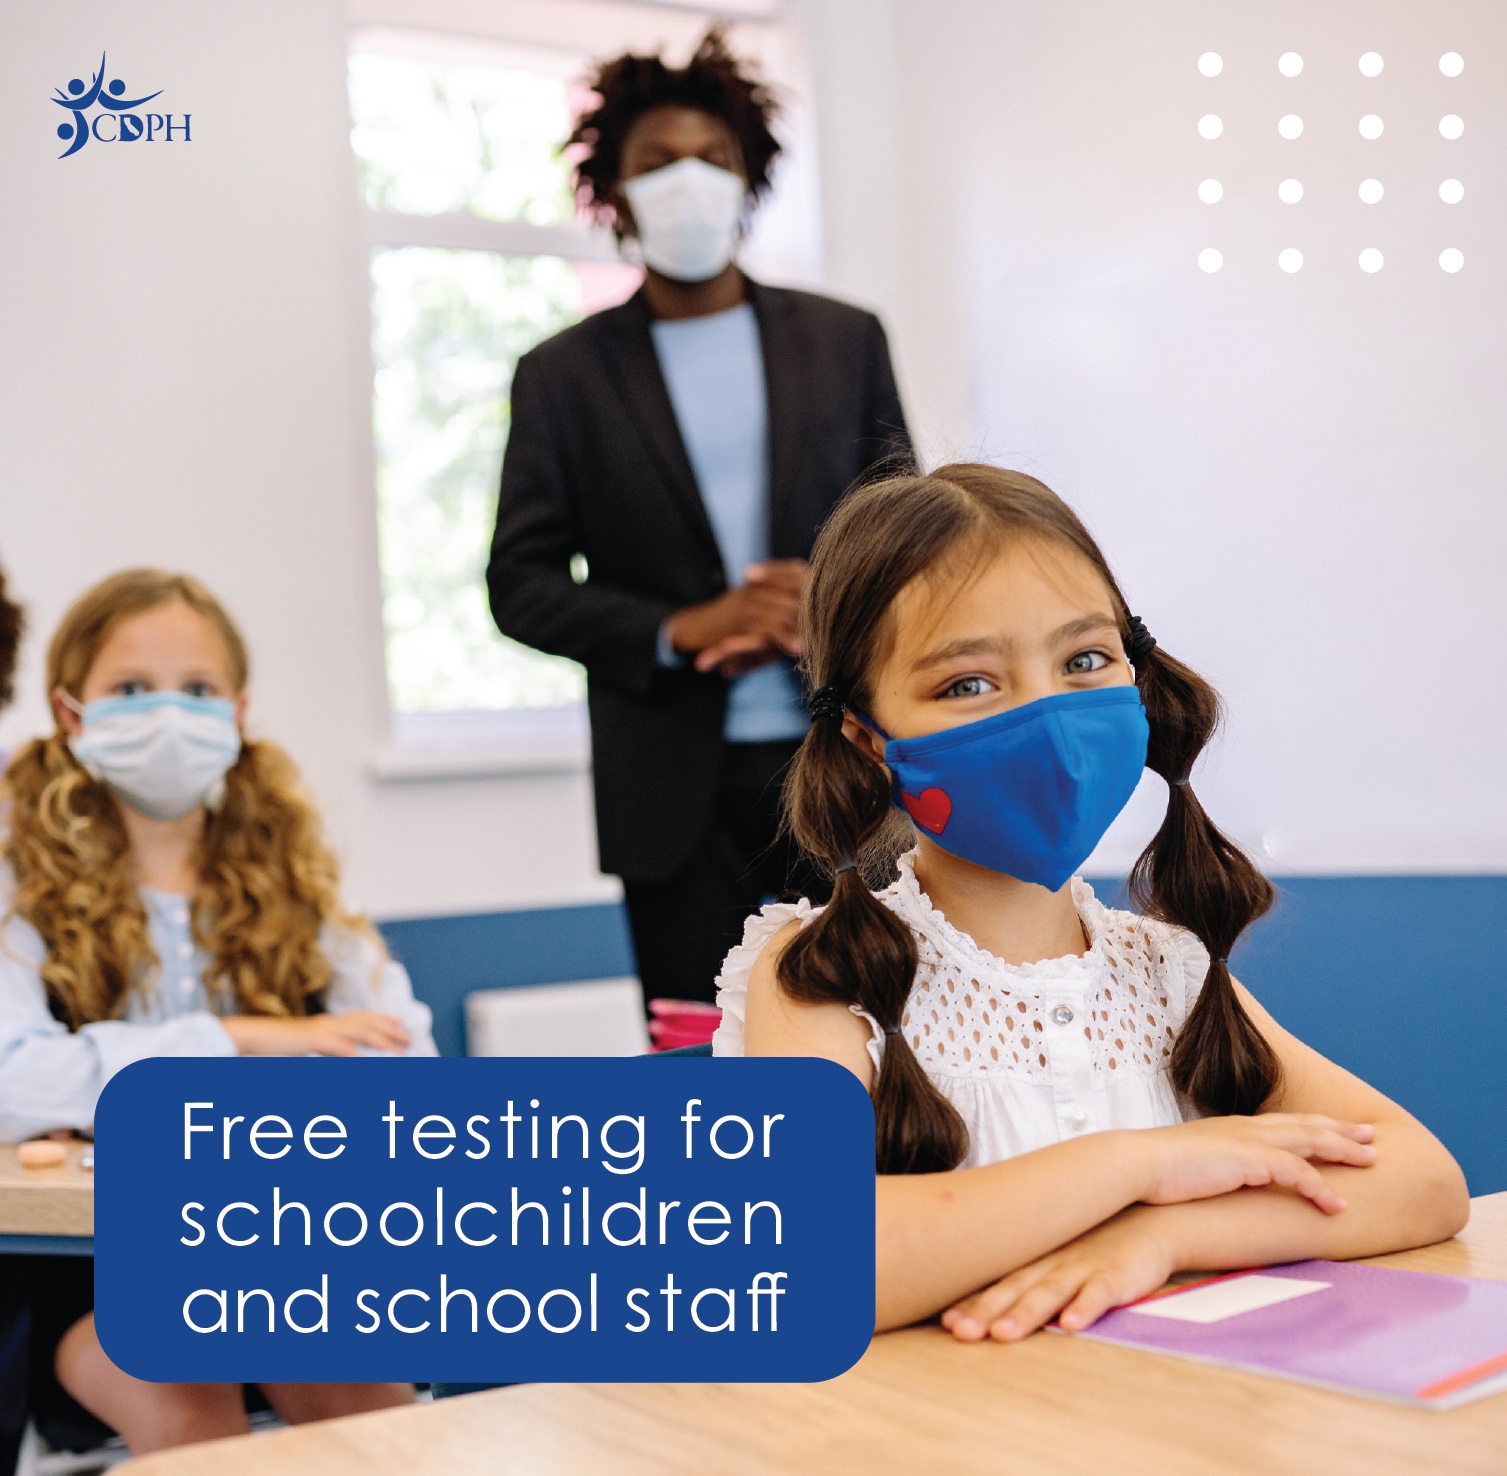 Child with mask in classroom with text overlay "Free testing for schoolchildren and school staff"